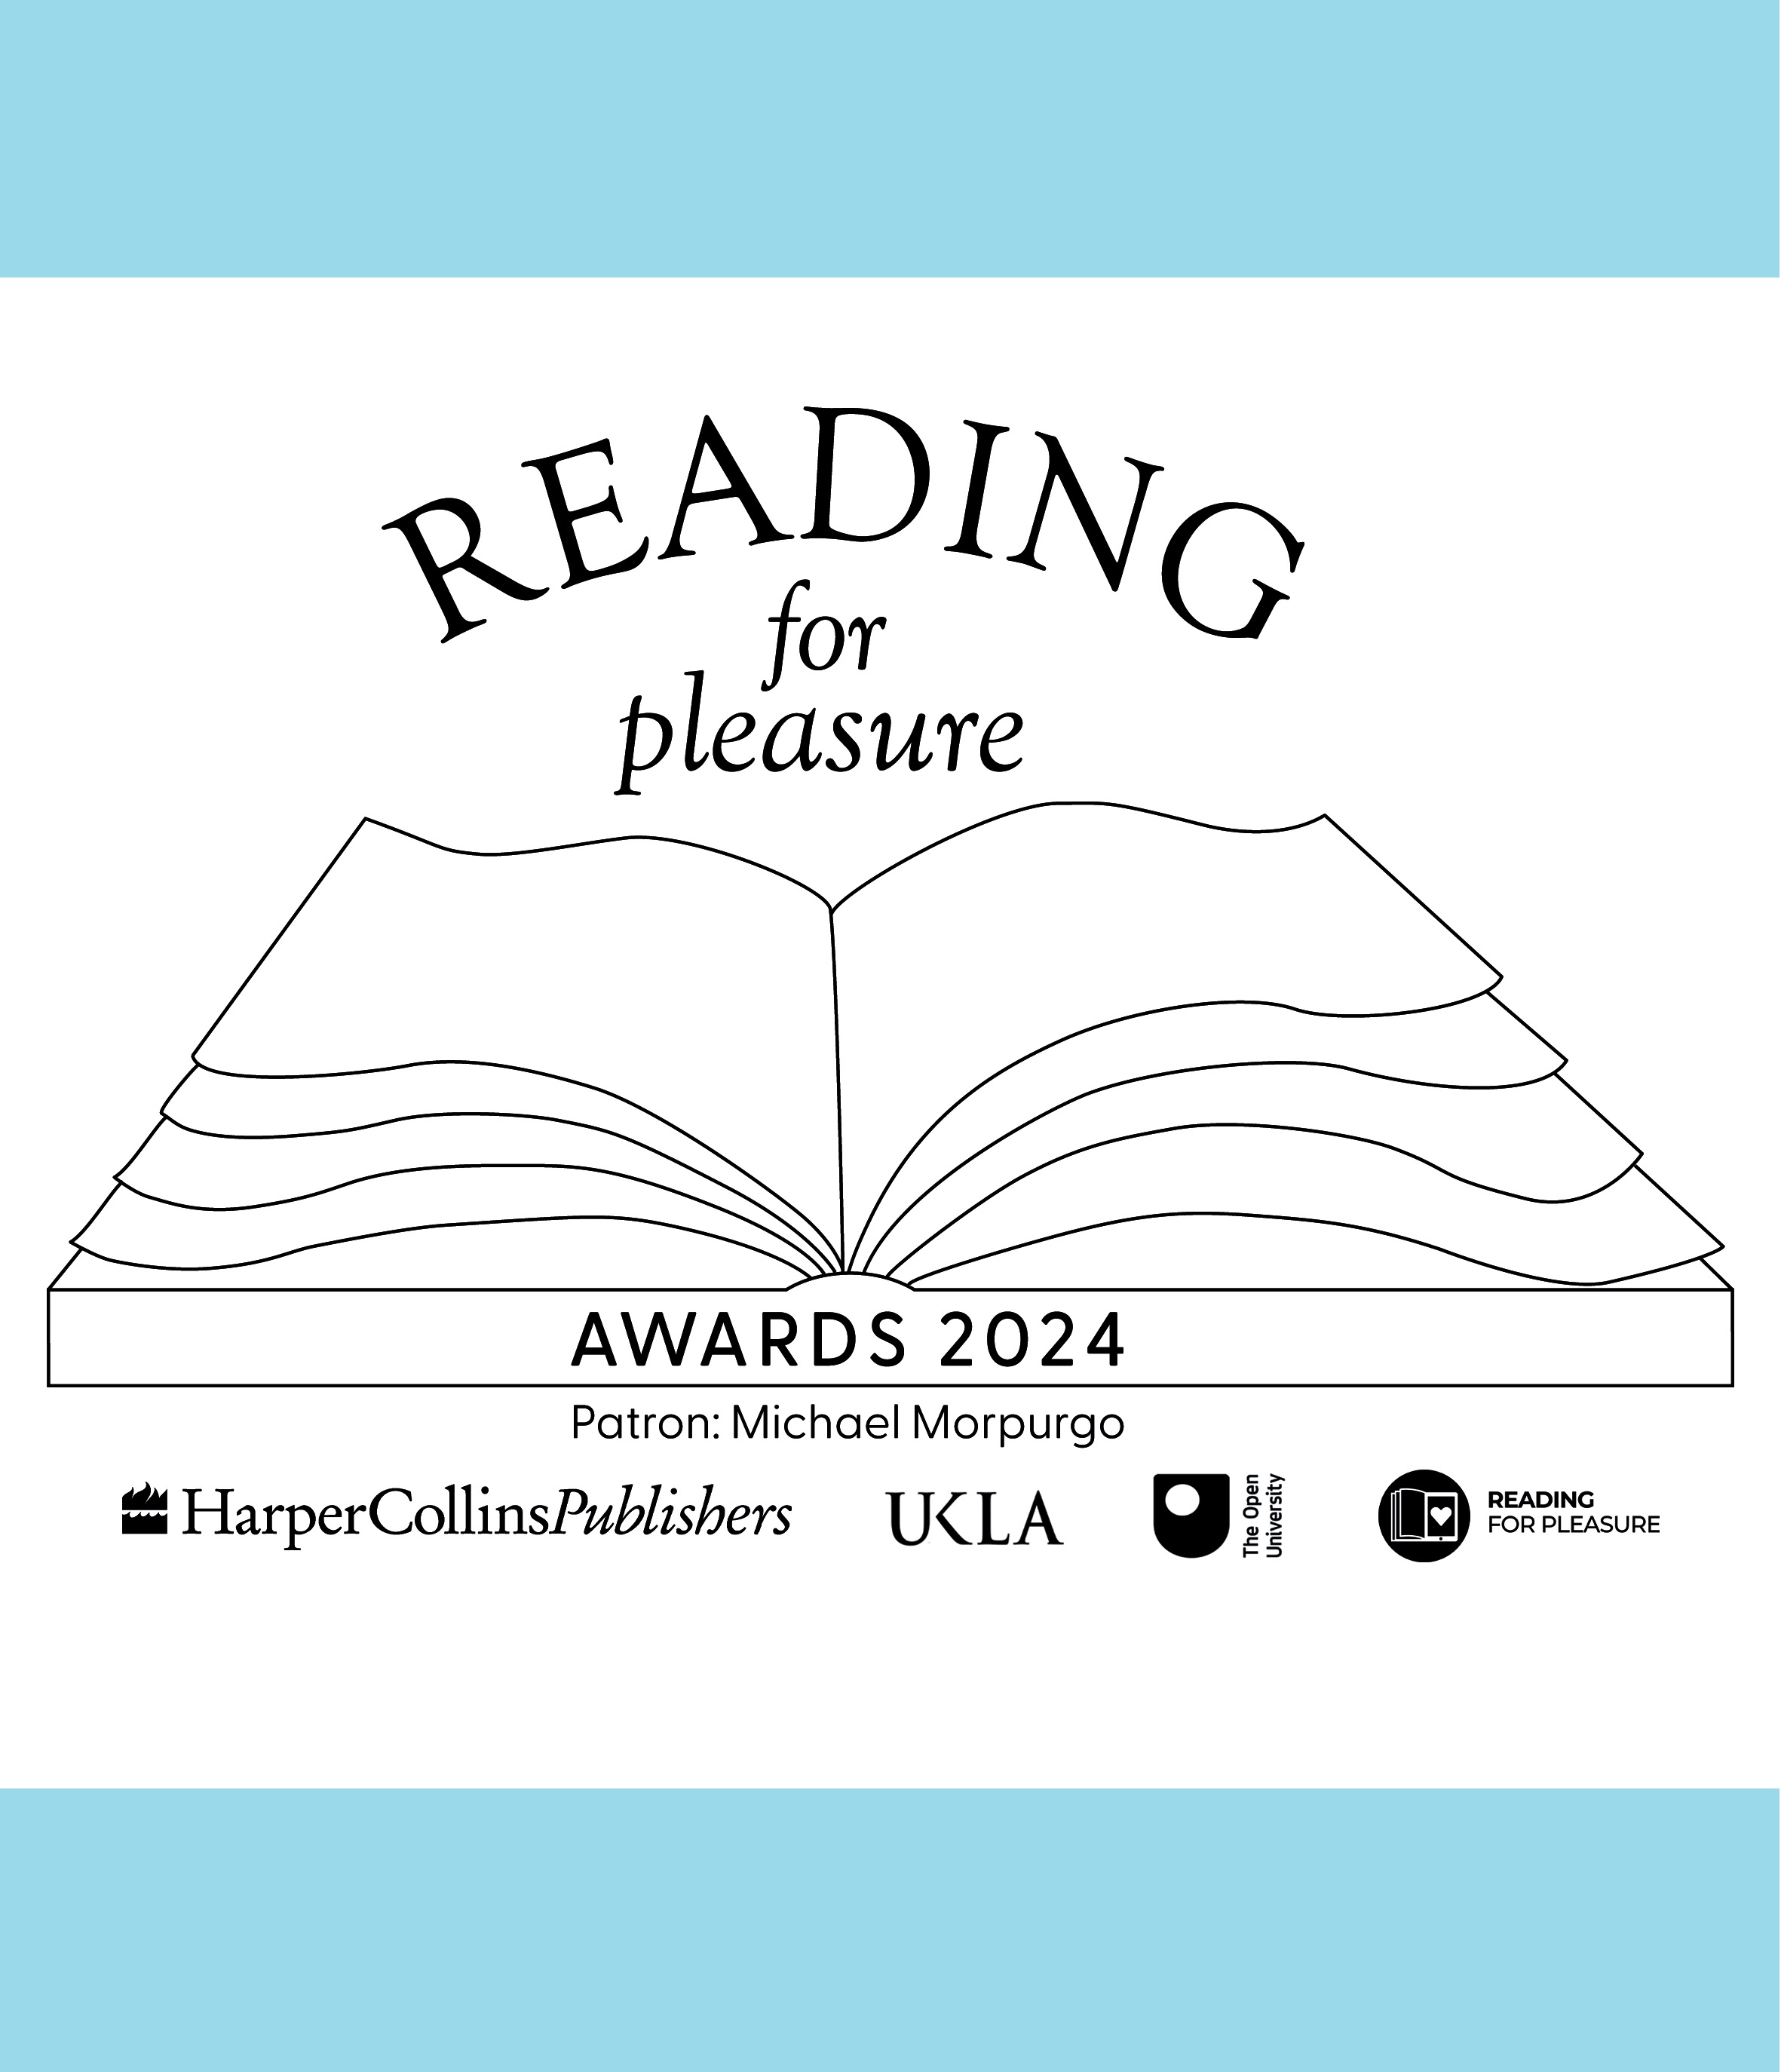 Innovative approaches to Reading for Pleasure win awards